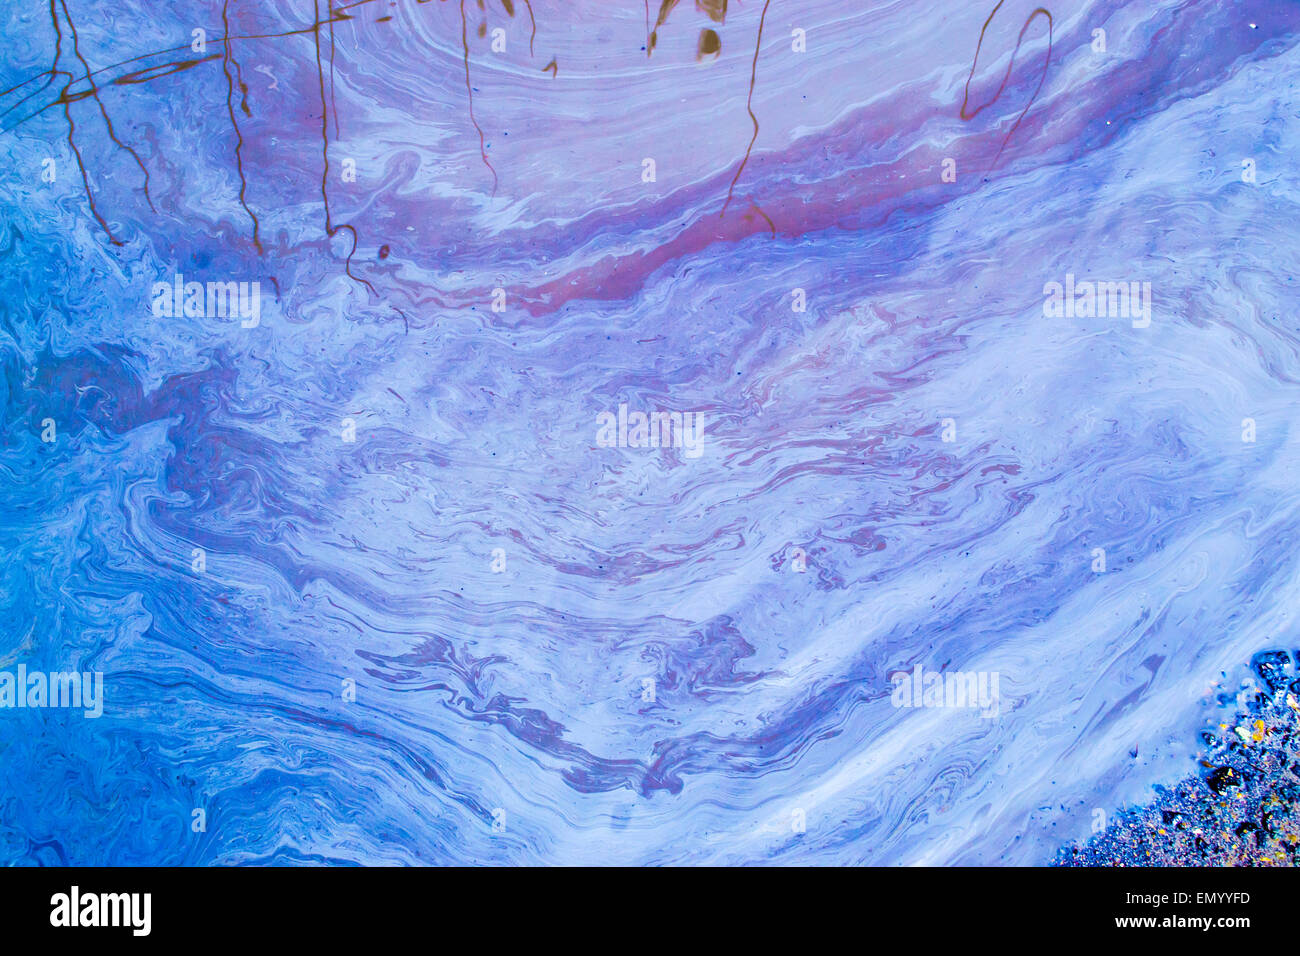 Oil swirls and patterns on the surface of a stagnant pool of water ...